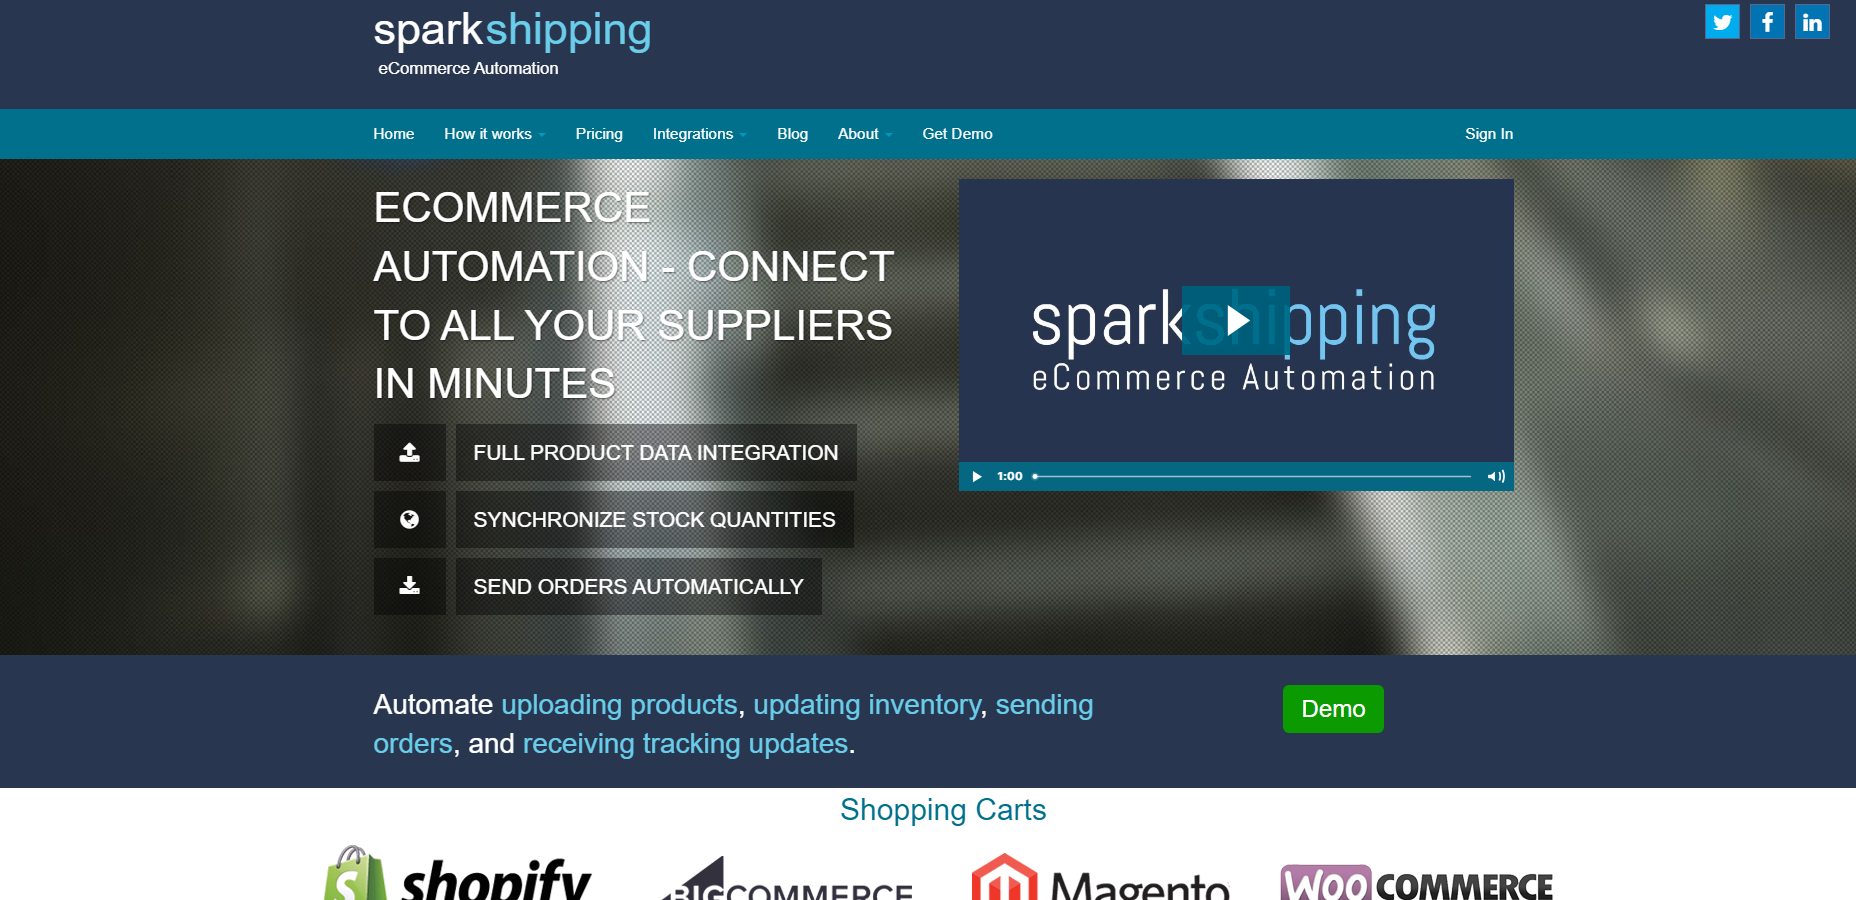 A screenshot showing Spark Shipping's eCommerce automation software